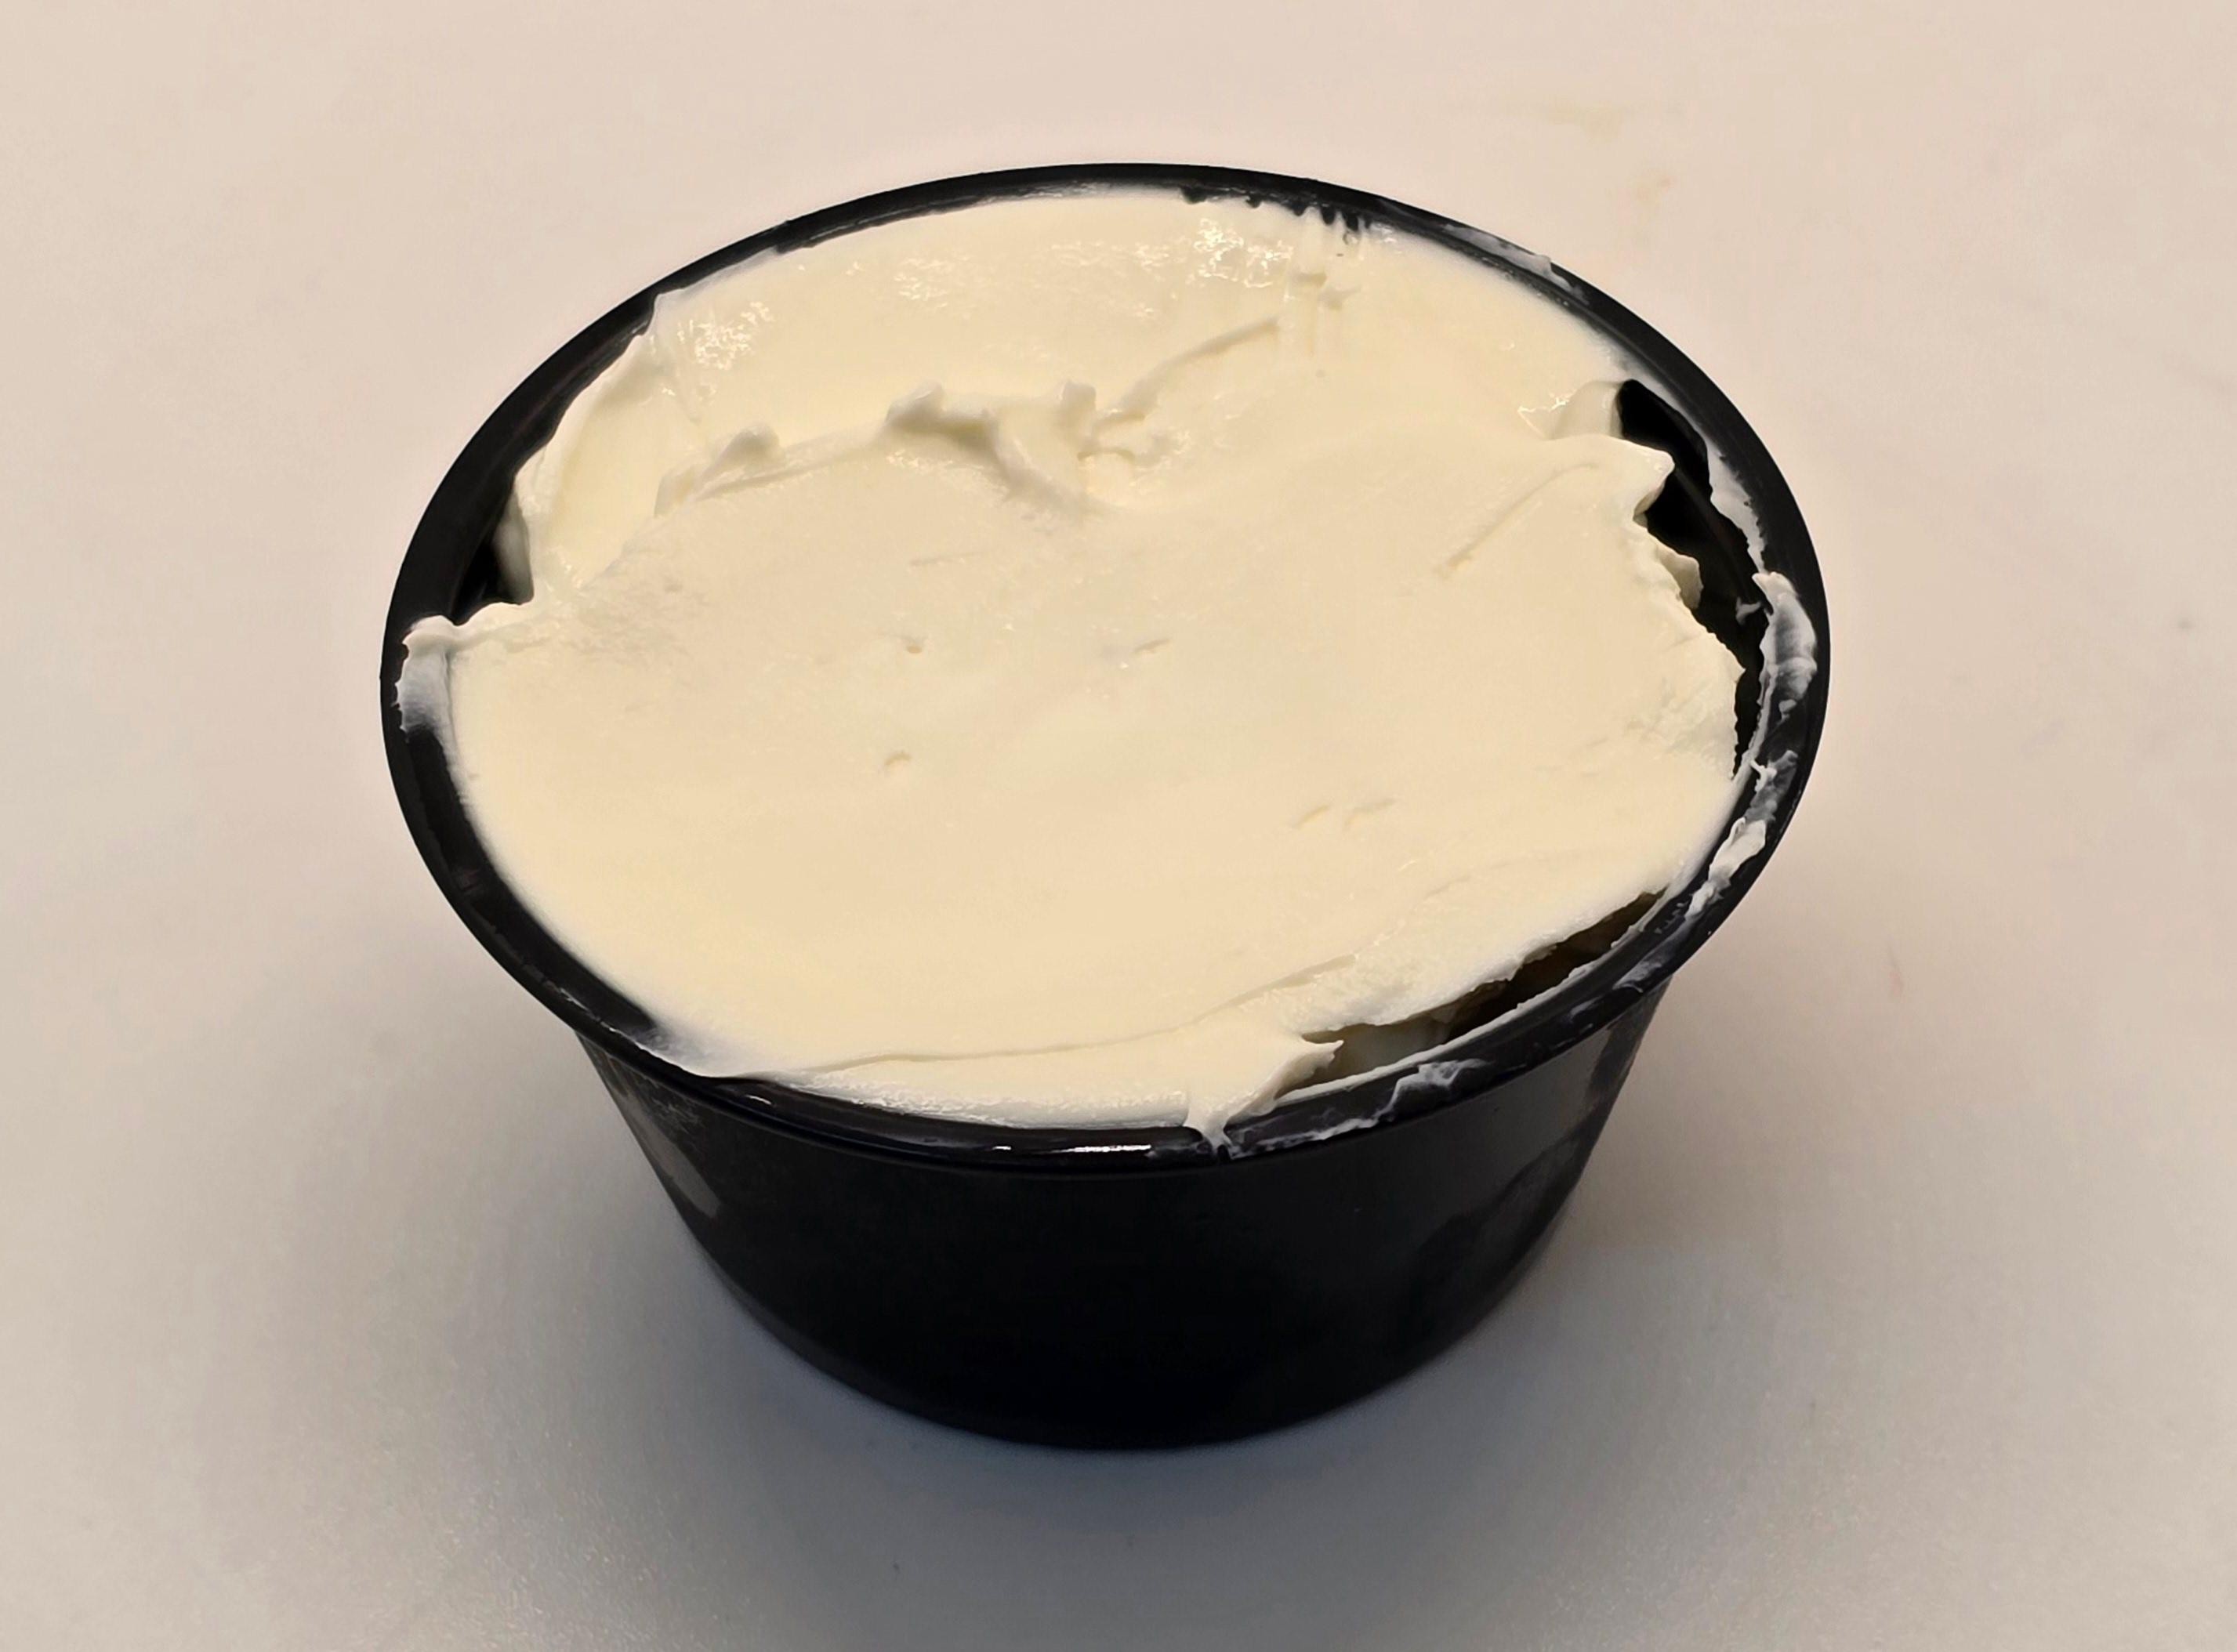 SIDE OF LOW FAT CREAM CHEESE